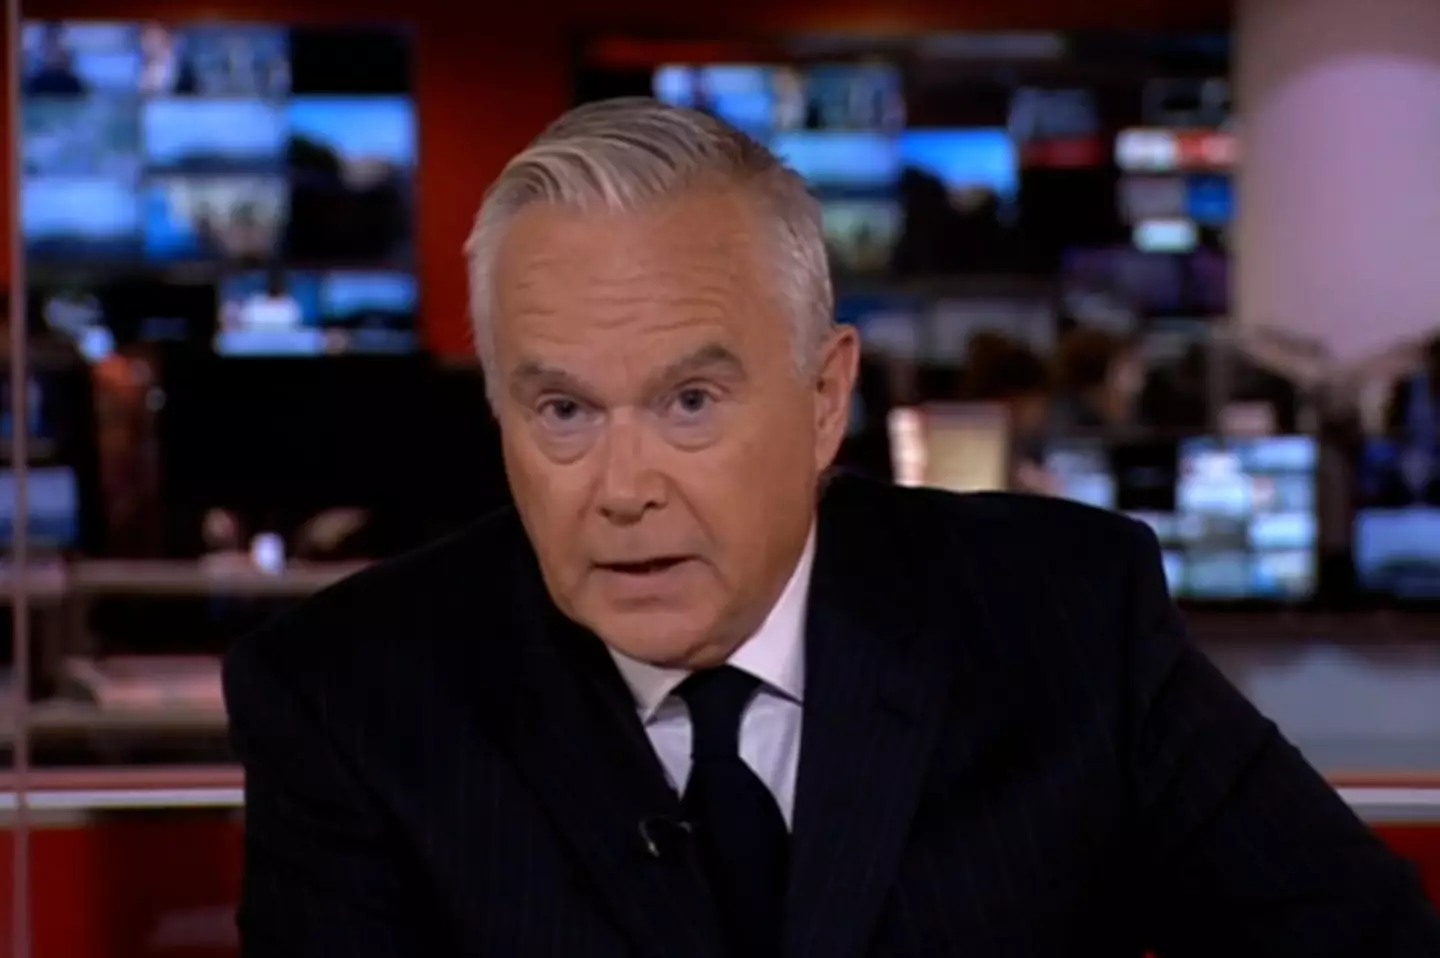 Huw Edwards has been a journalist at the BBC since 1984.